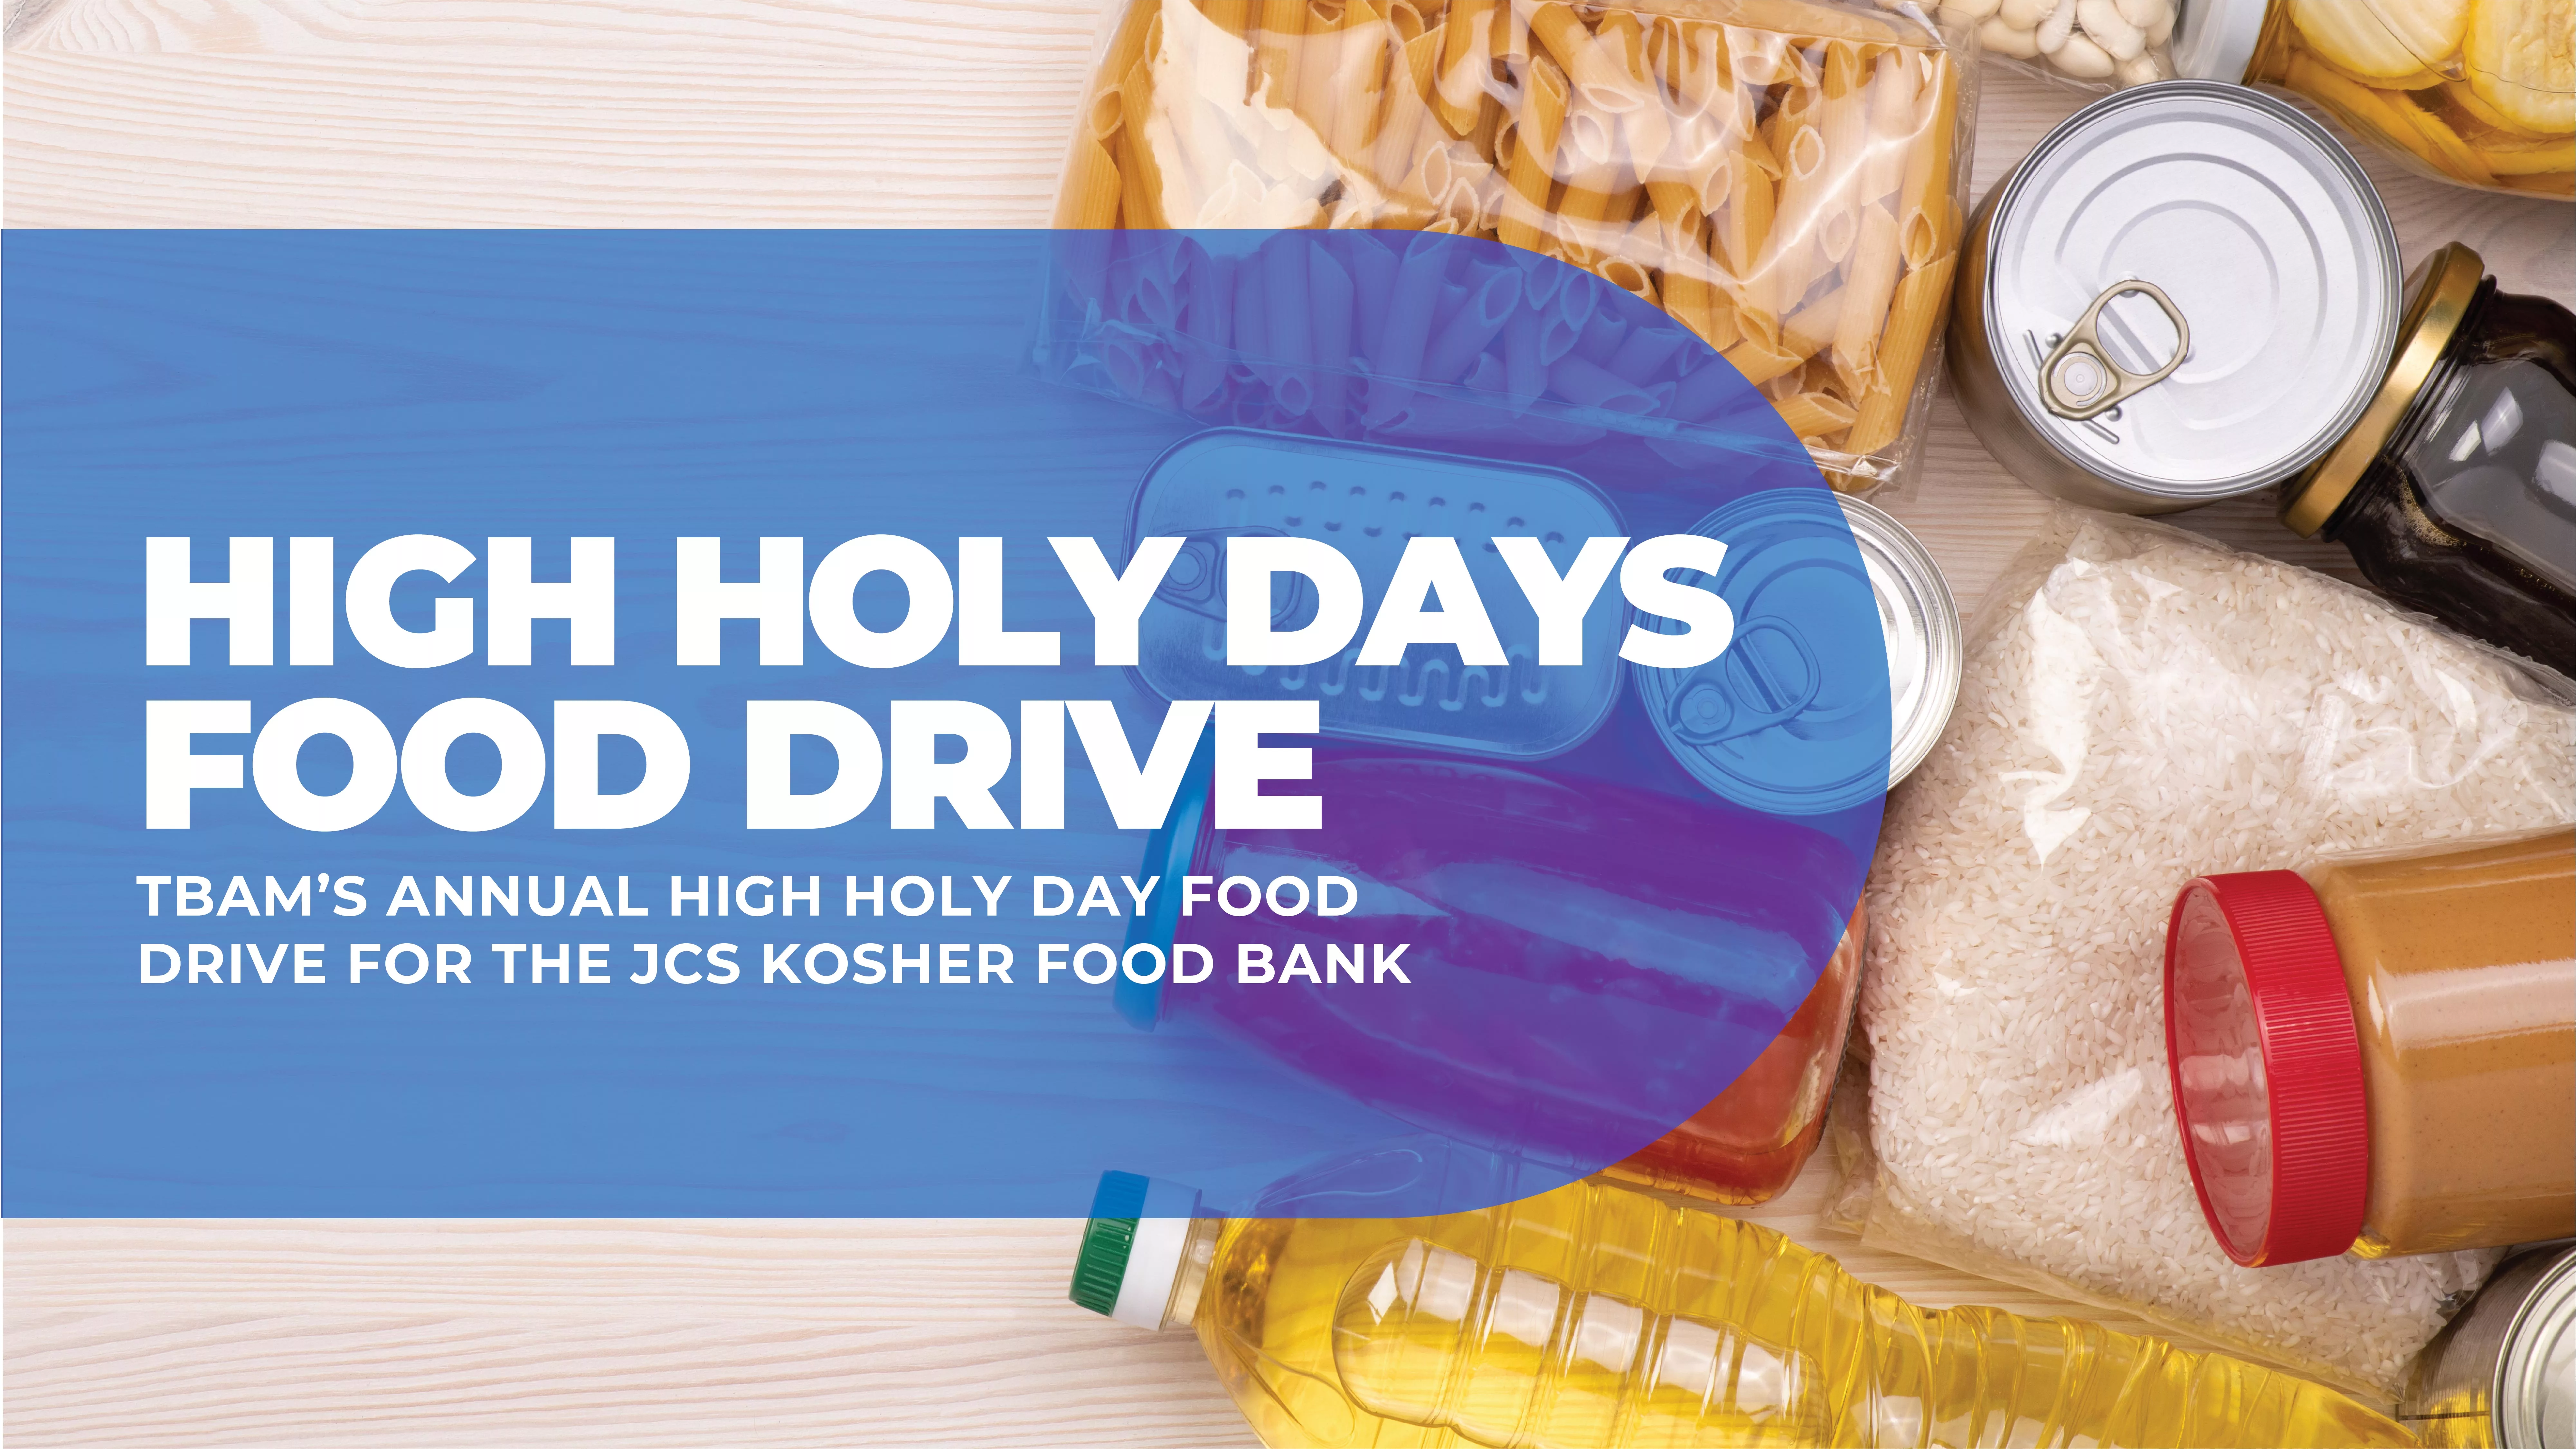 high holy day food drive, pasta soup, oil, fish banner